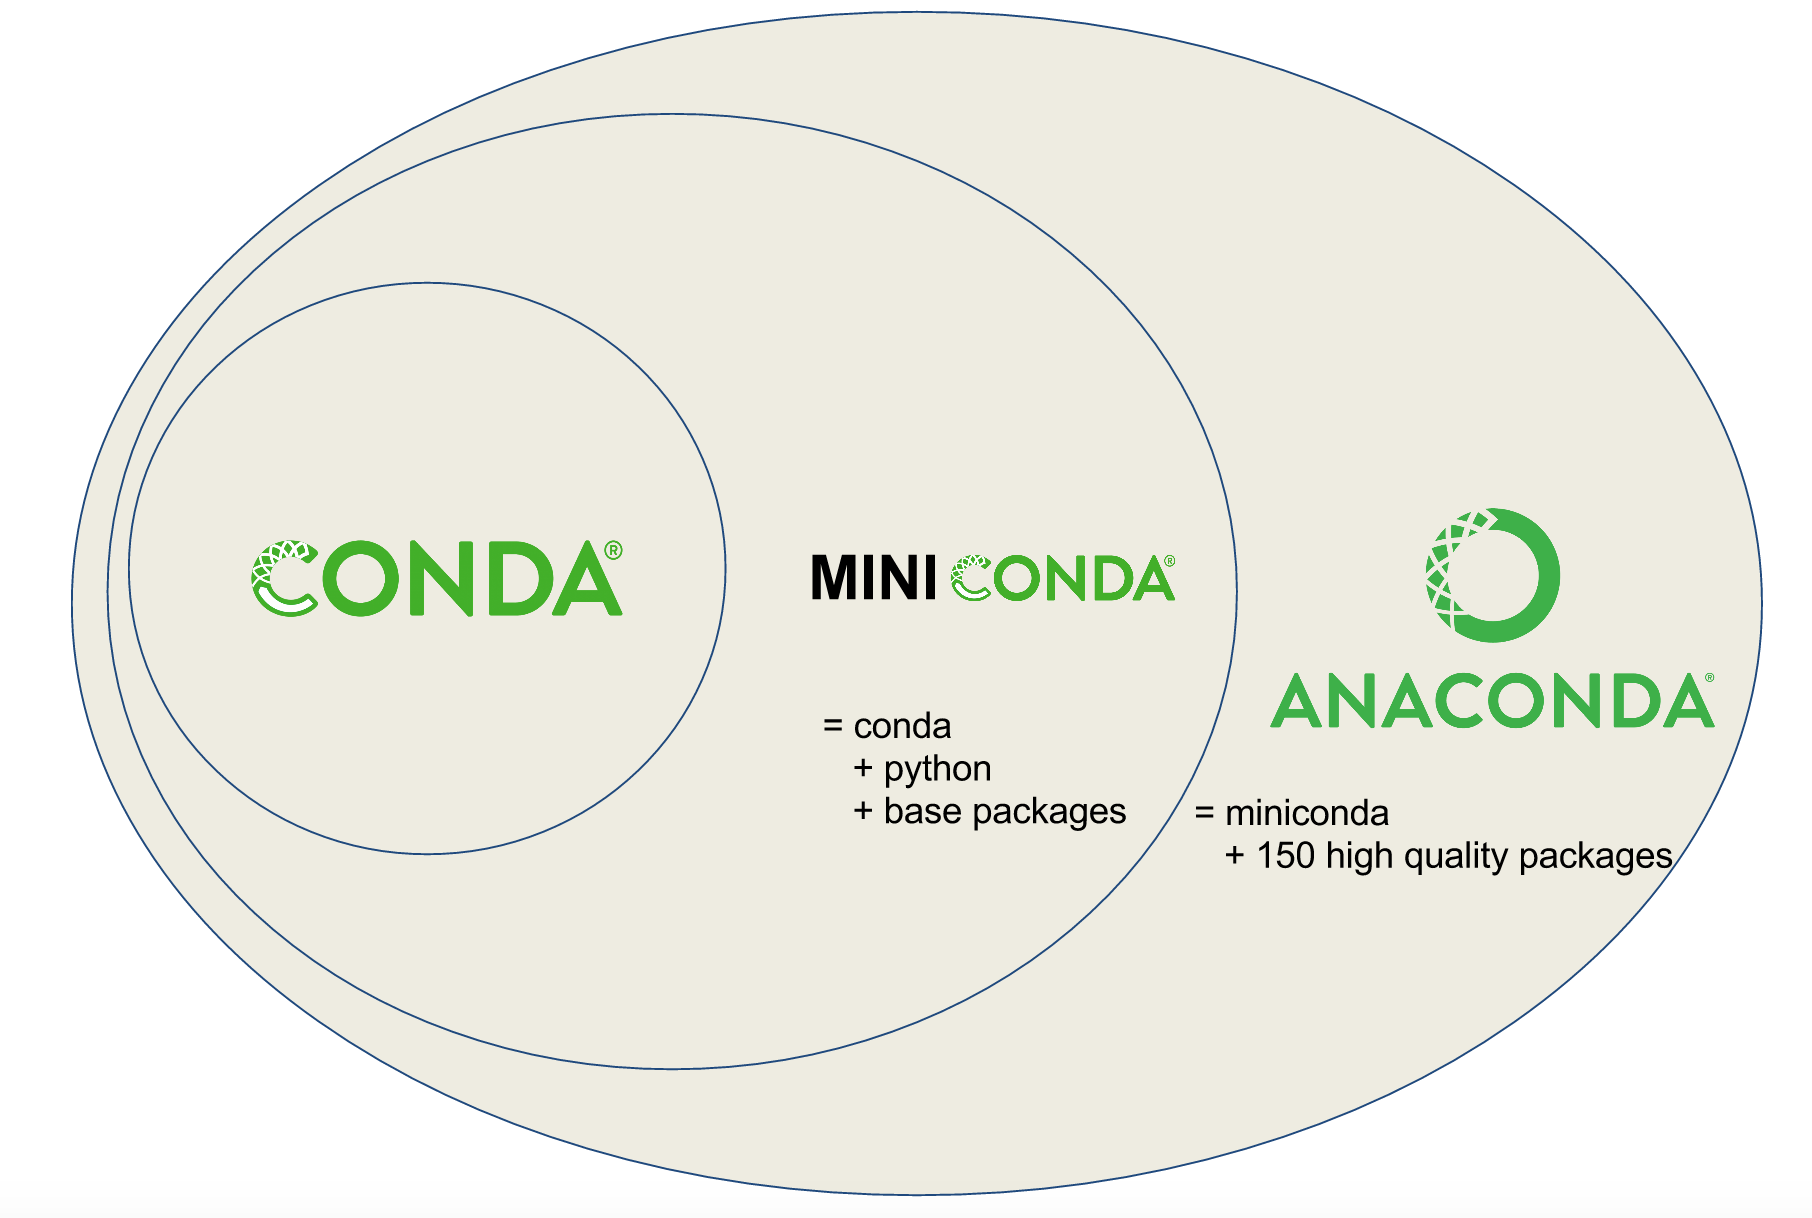 Schematic showing conda as a small circle, miniconda encompasses it and adds python and base packages. Anaconda encompasses all of it, adding 150 high quality packages.